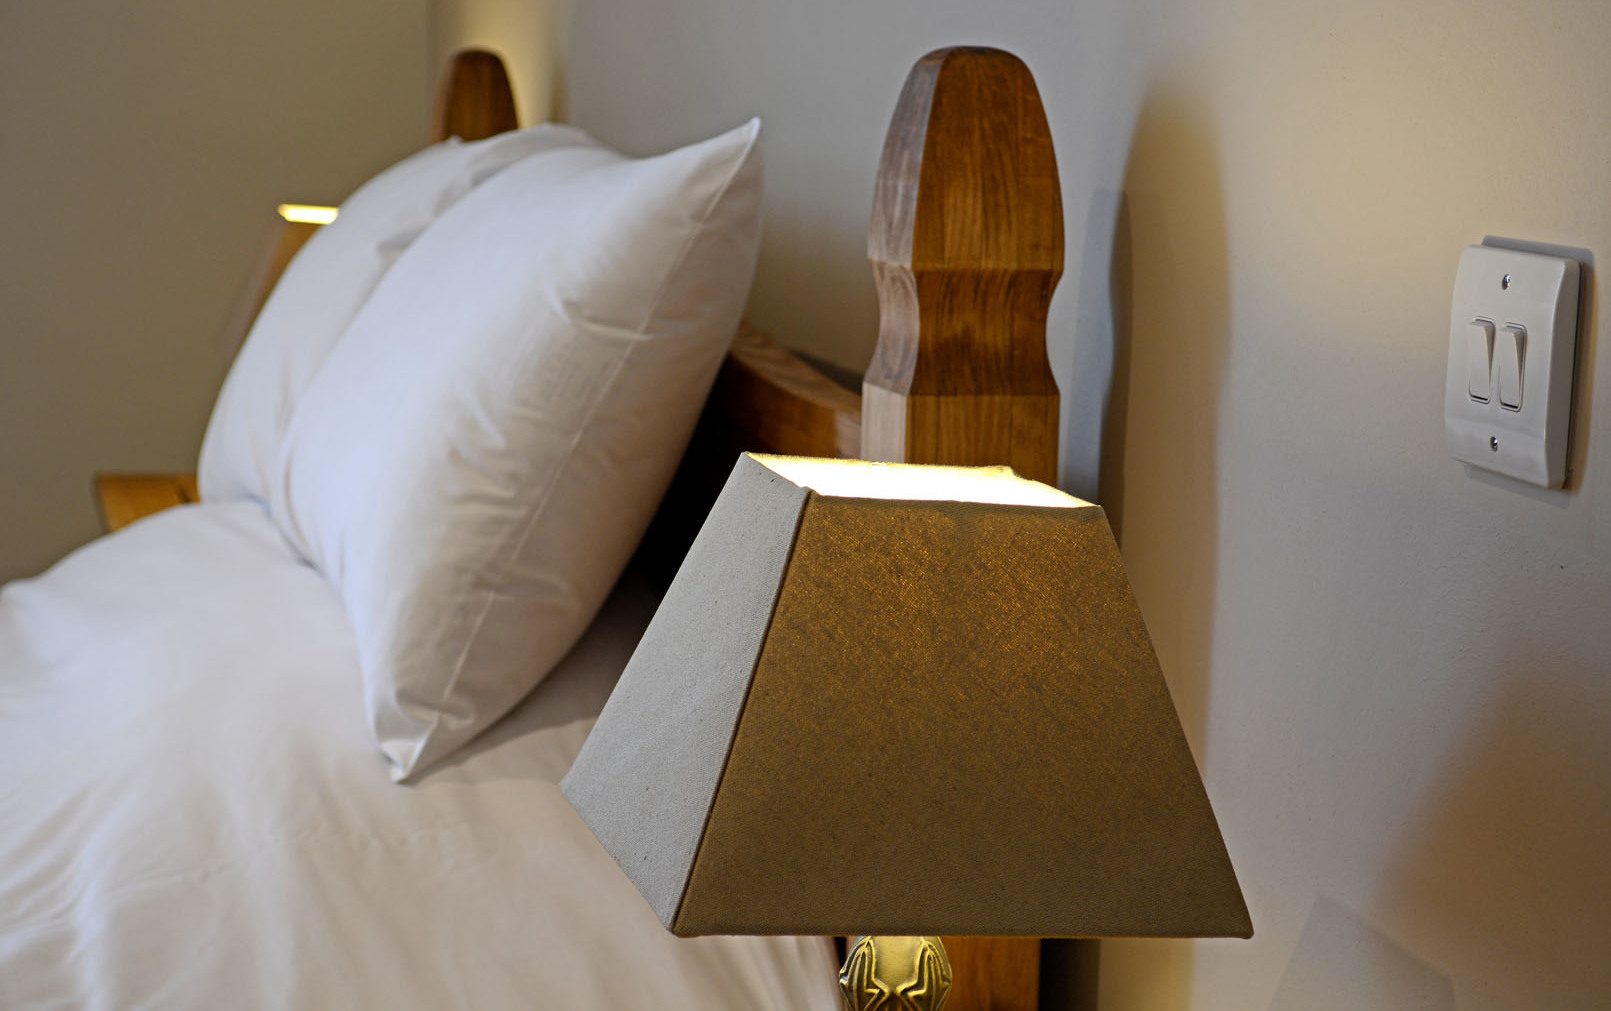 Bedside table lamp adjacent to a bed